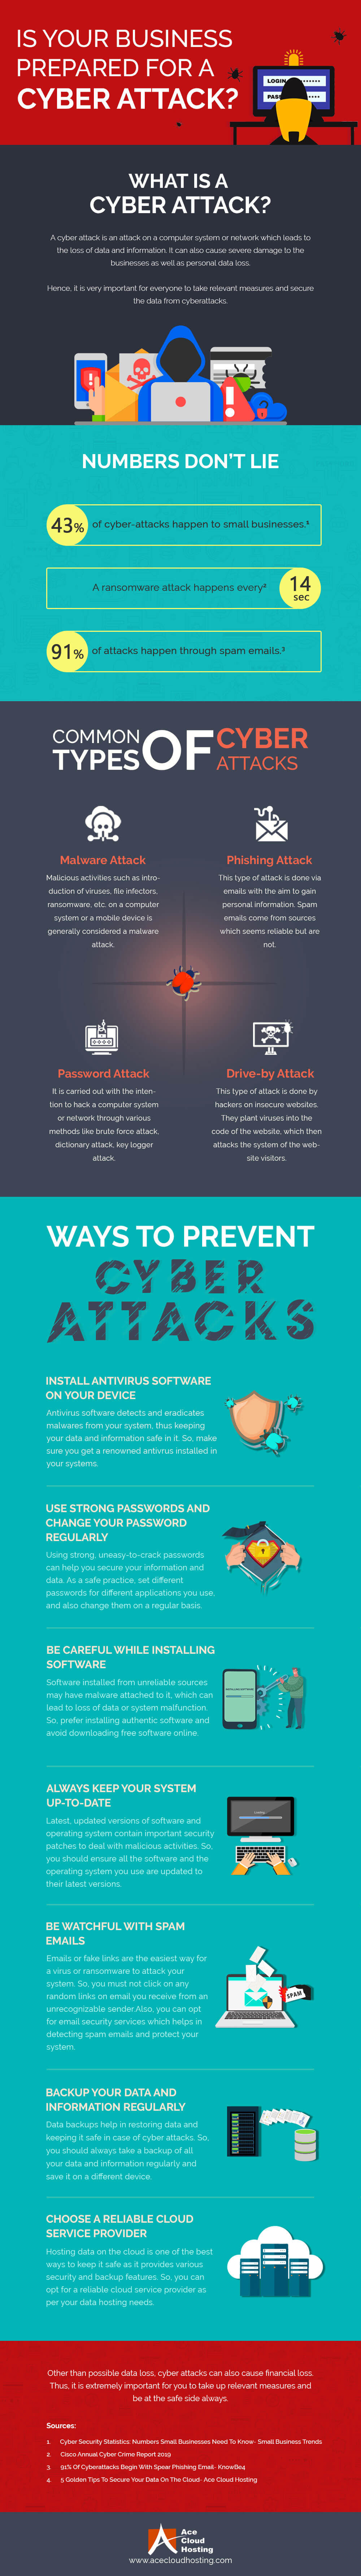 [Infographic] Is Your Business Prepared For A Cyber Attack?